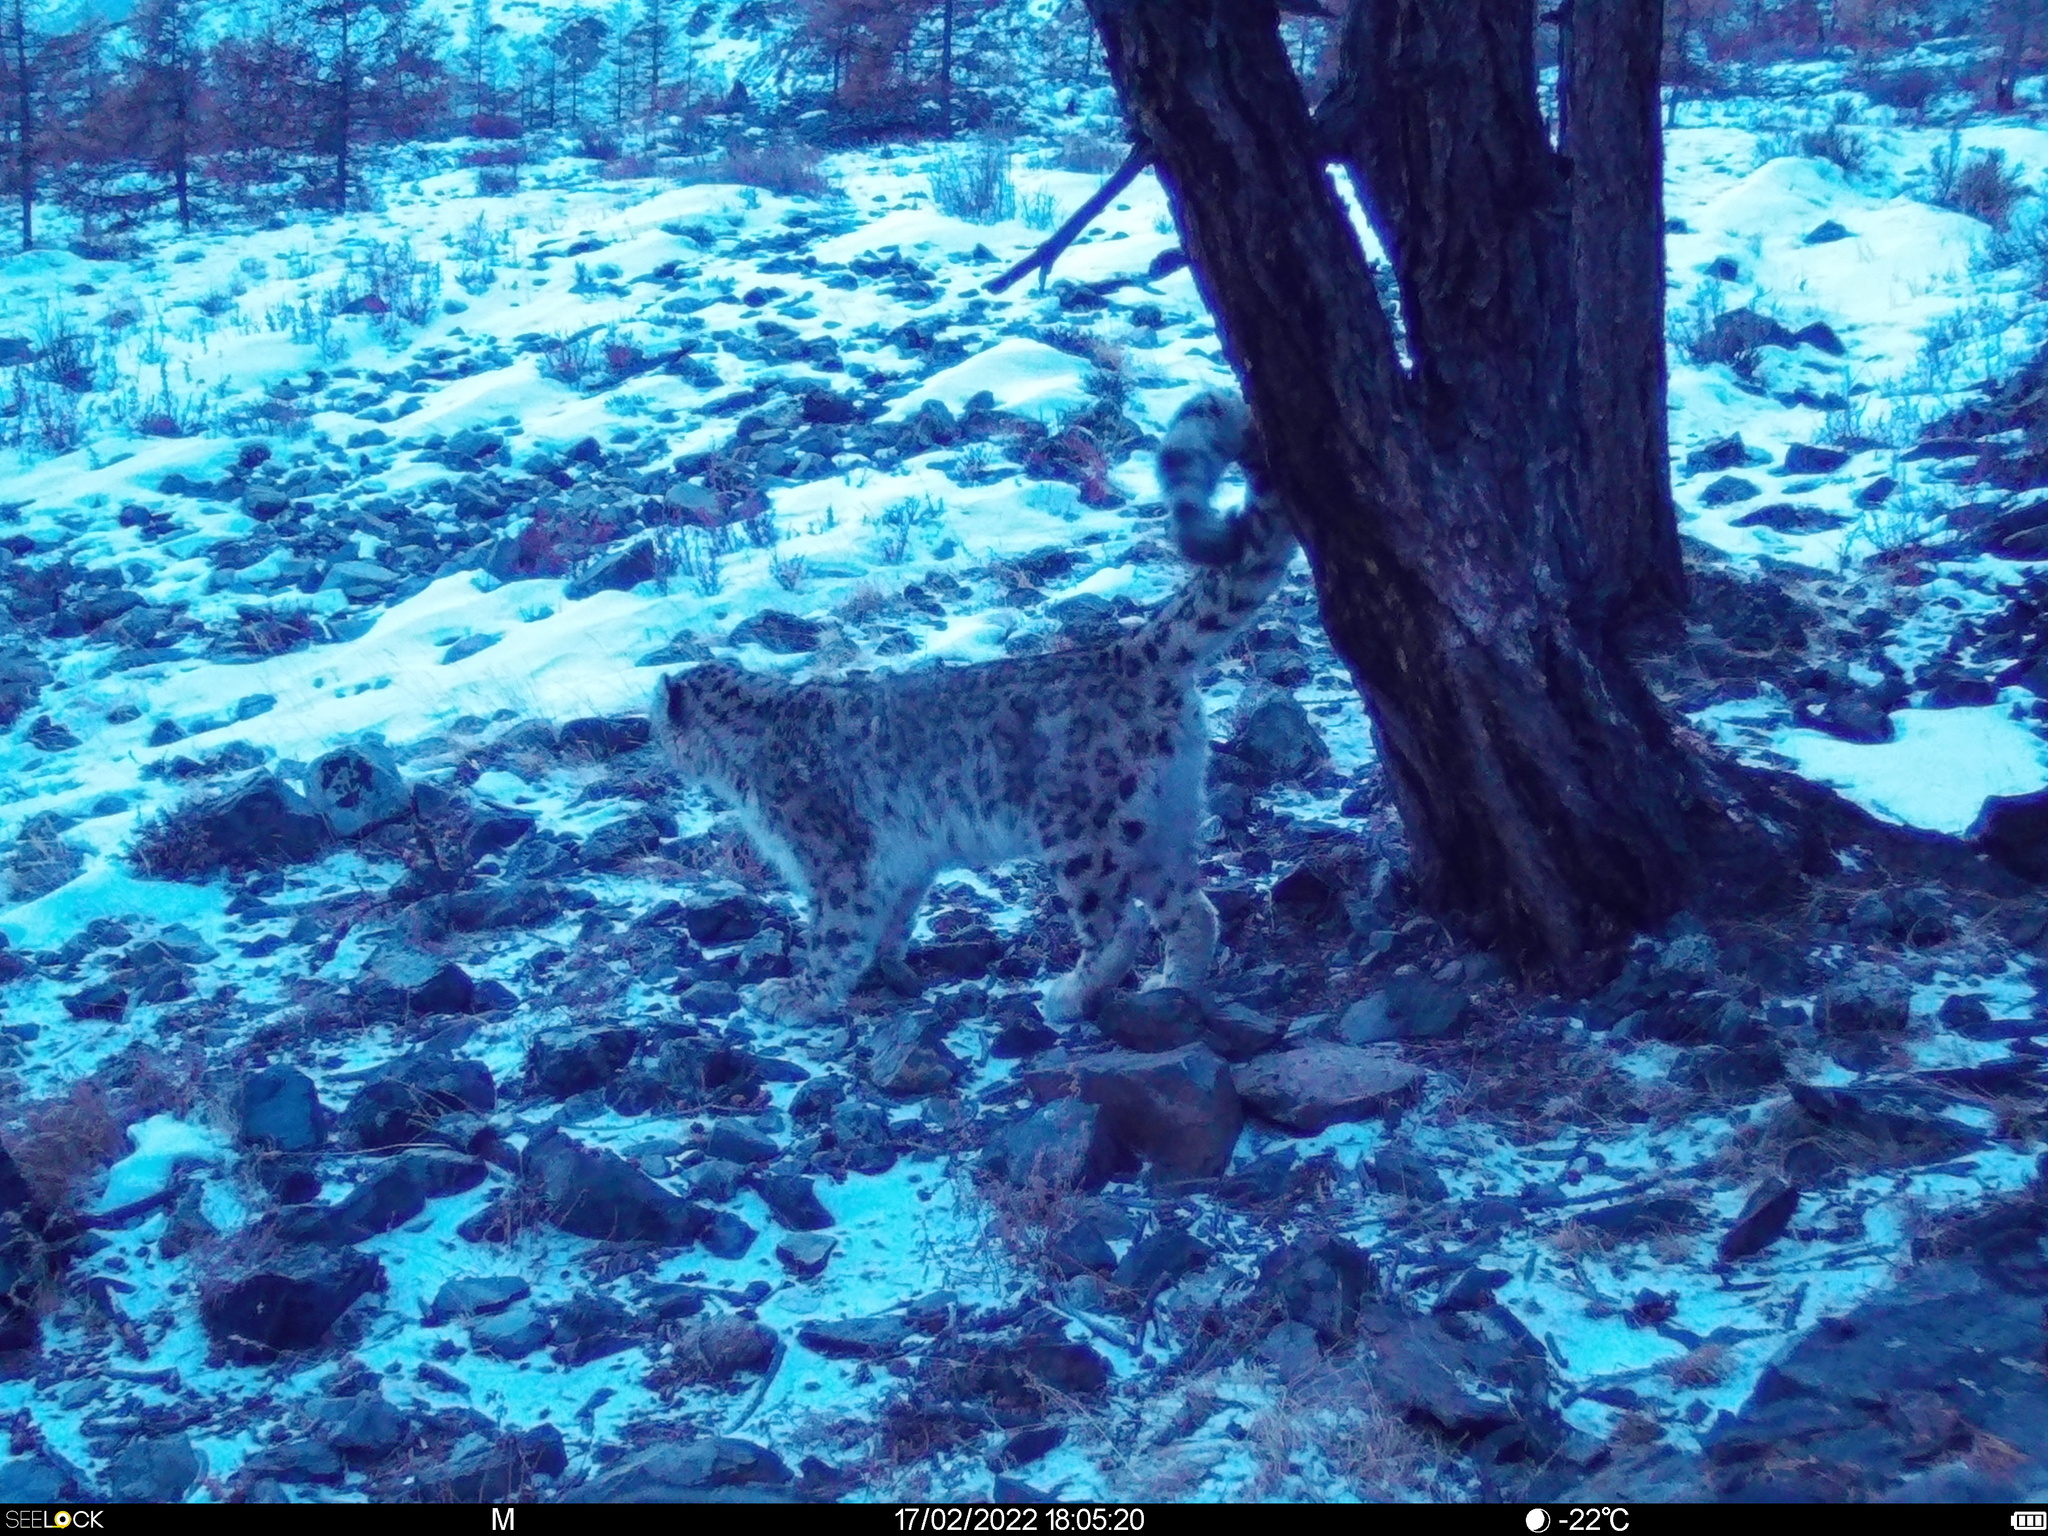 The oldest snow leopard in Russia named Khorgay is alive and well - Snow Leopard, Big cats, Cat family, Predatory animals, Wild animals, Phototrap, Rare view, Red Book, Reserves and sanctuaries, Altai Mountains, Good news, Tyva Republic, Mongolia, Fluffy, Video, Youtube, Longpost